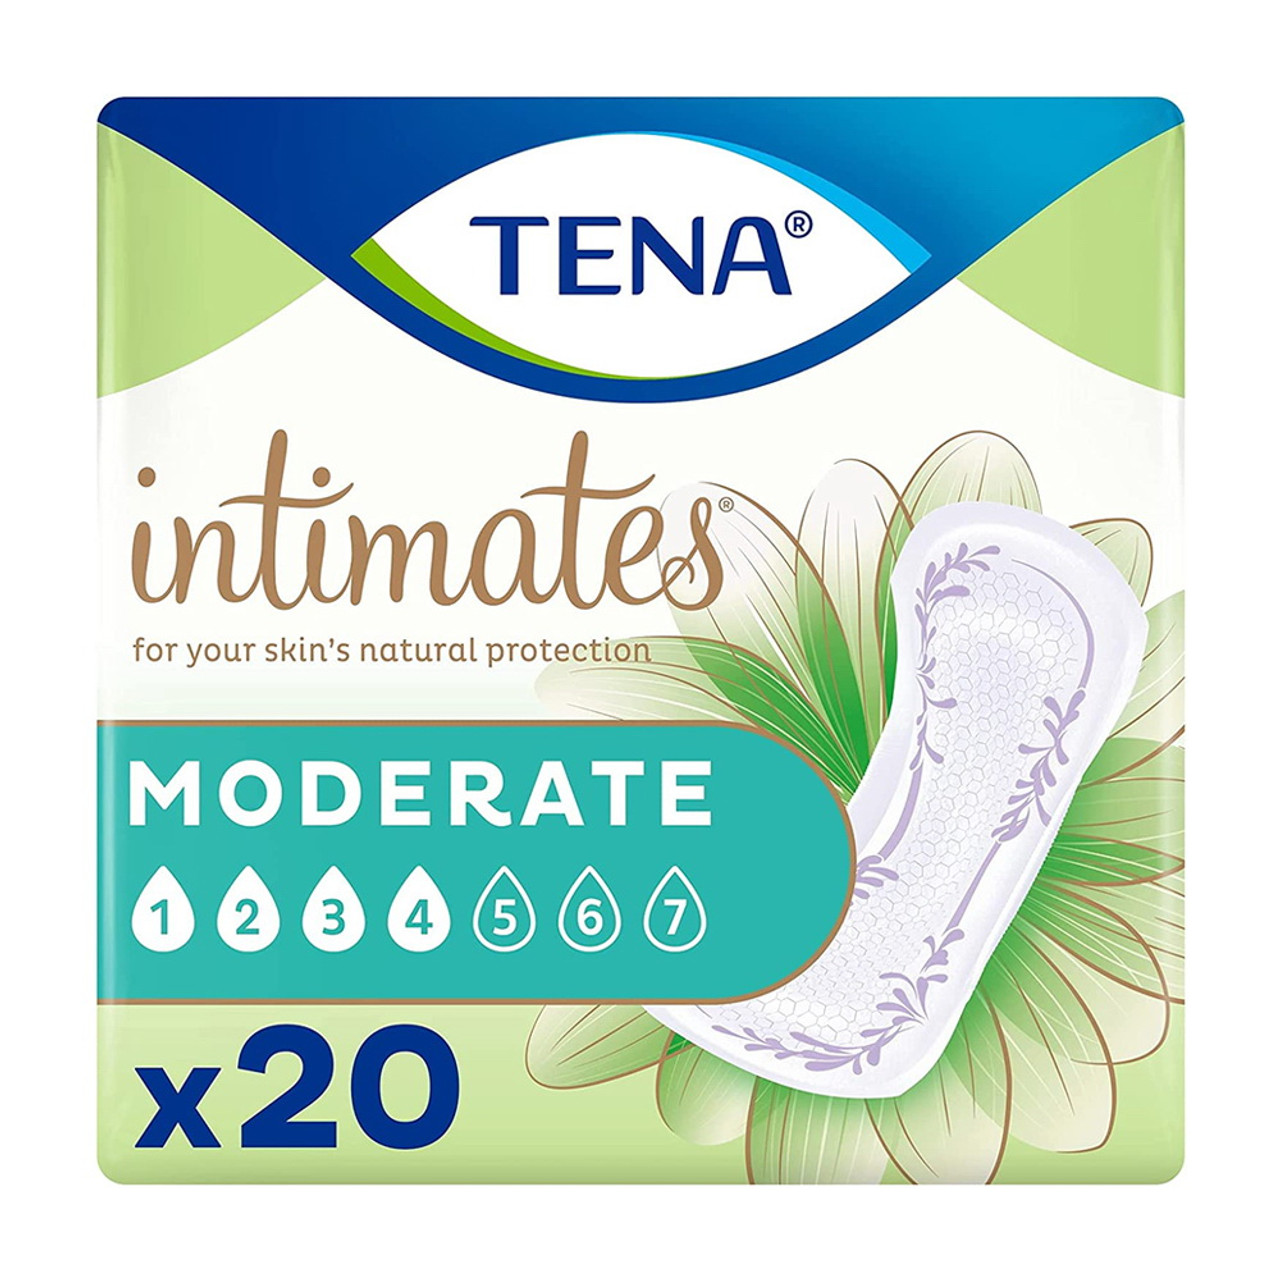 Tena Intimates Extra Coverage Overnight Incontinence Pads, 28 Ea